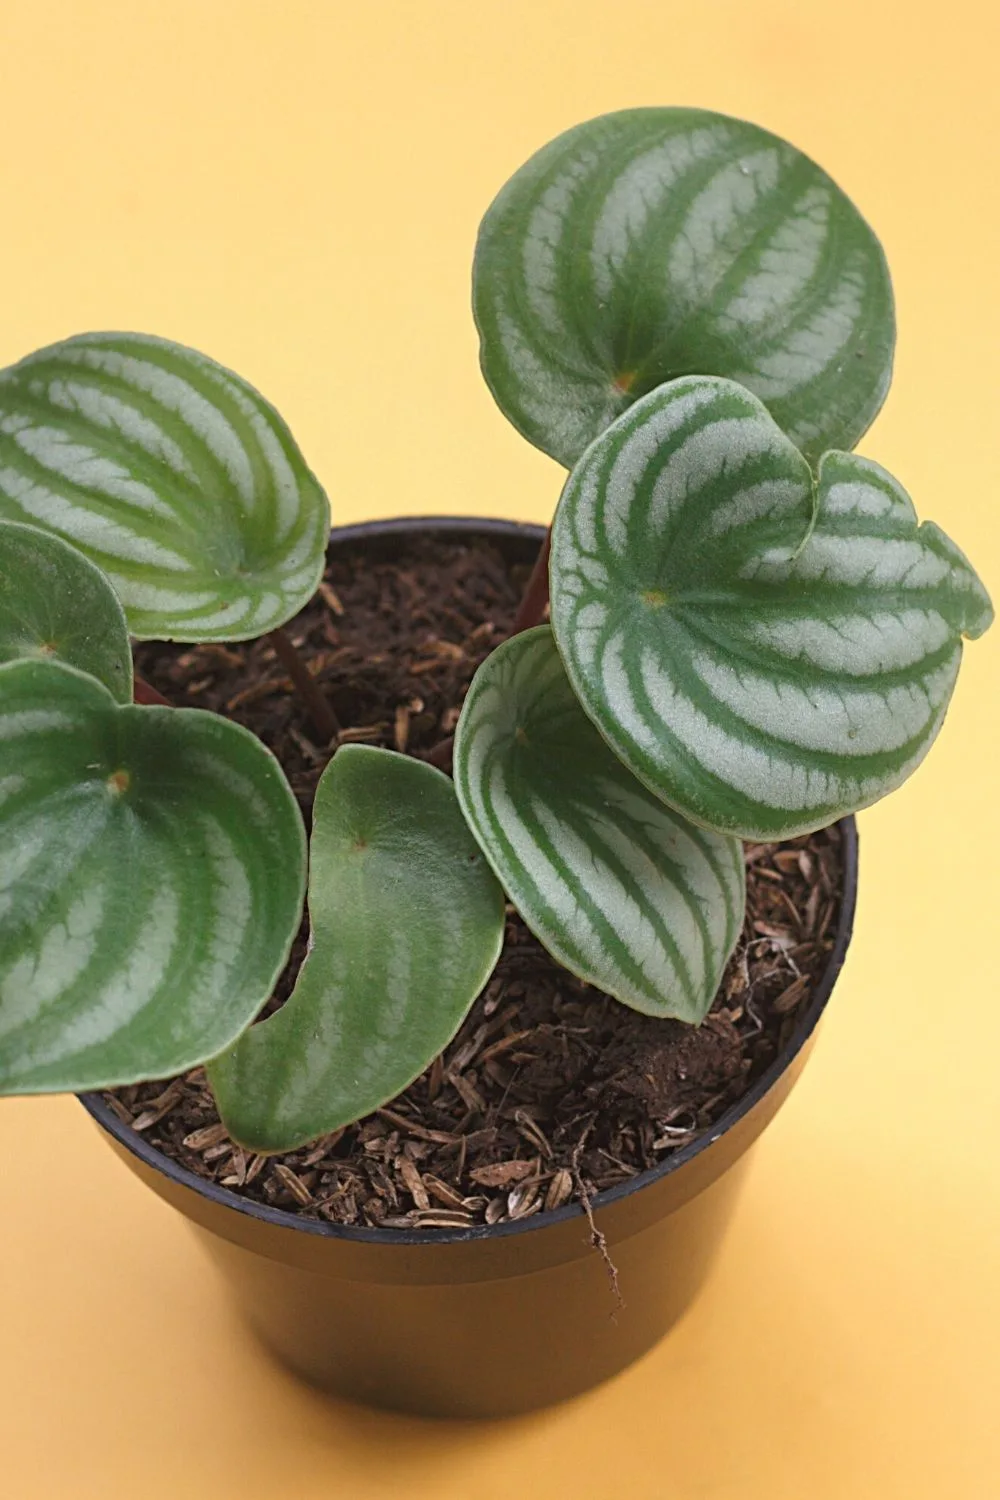 Allow the leaf of the Peperomia Watermelon stem cutting to rest on the rim of the pot